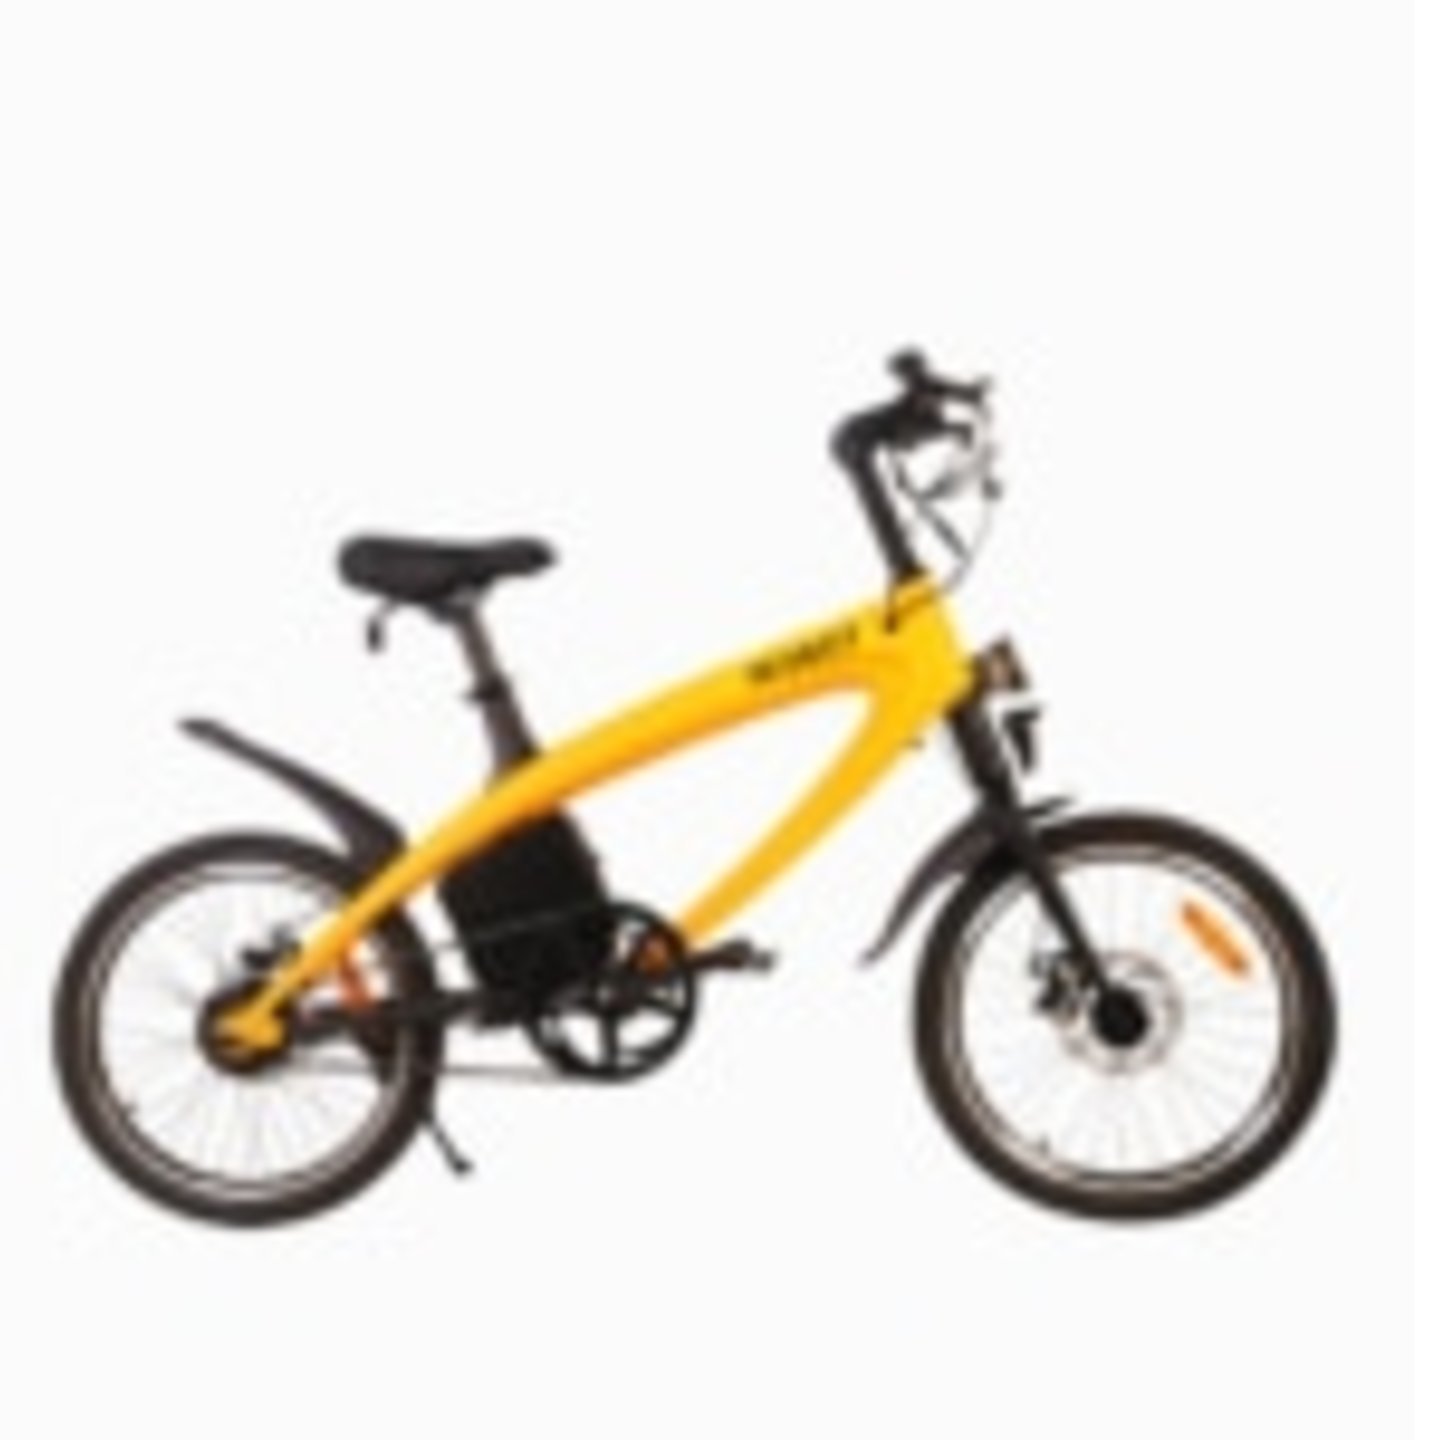 OVO S1-1 ebike with Dual battery